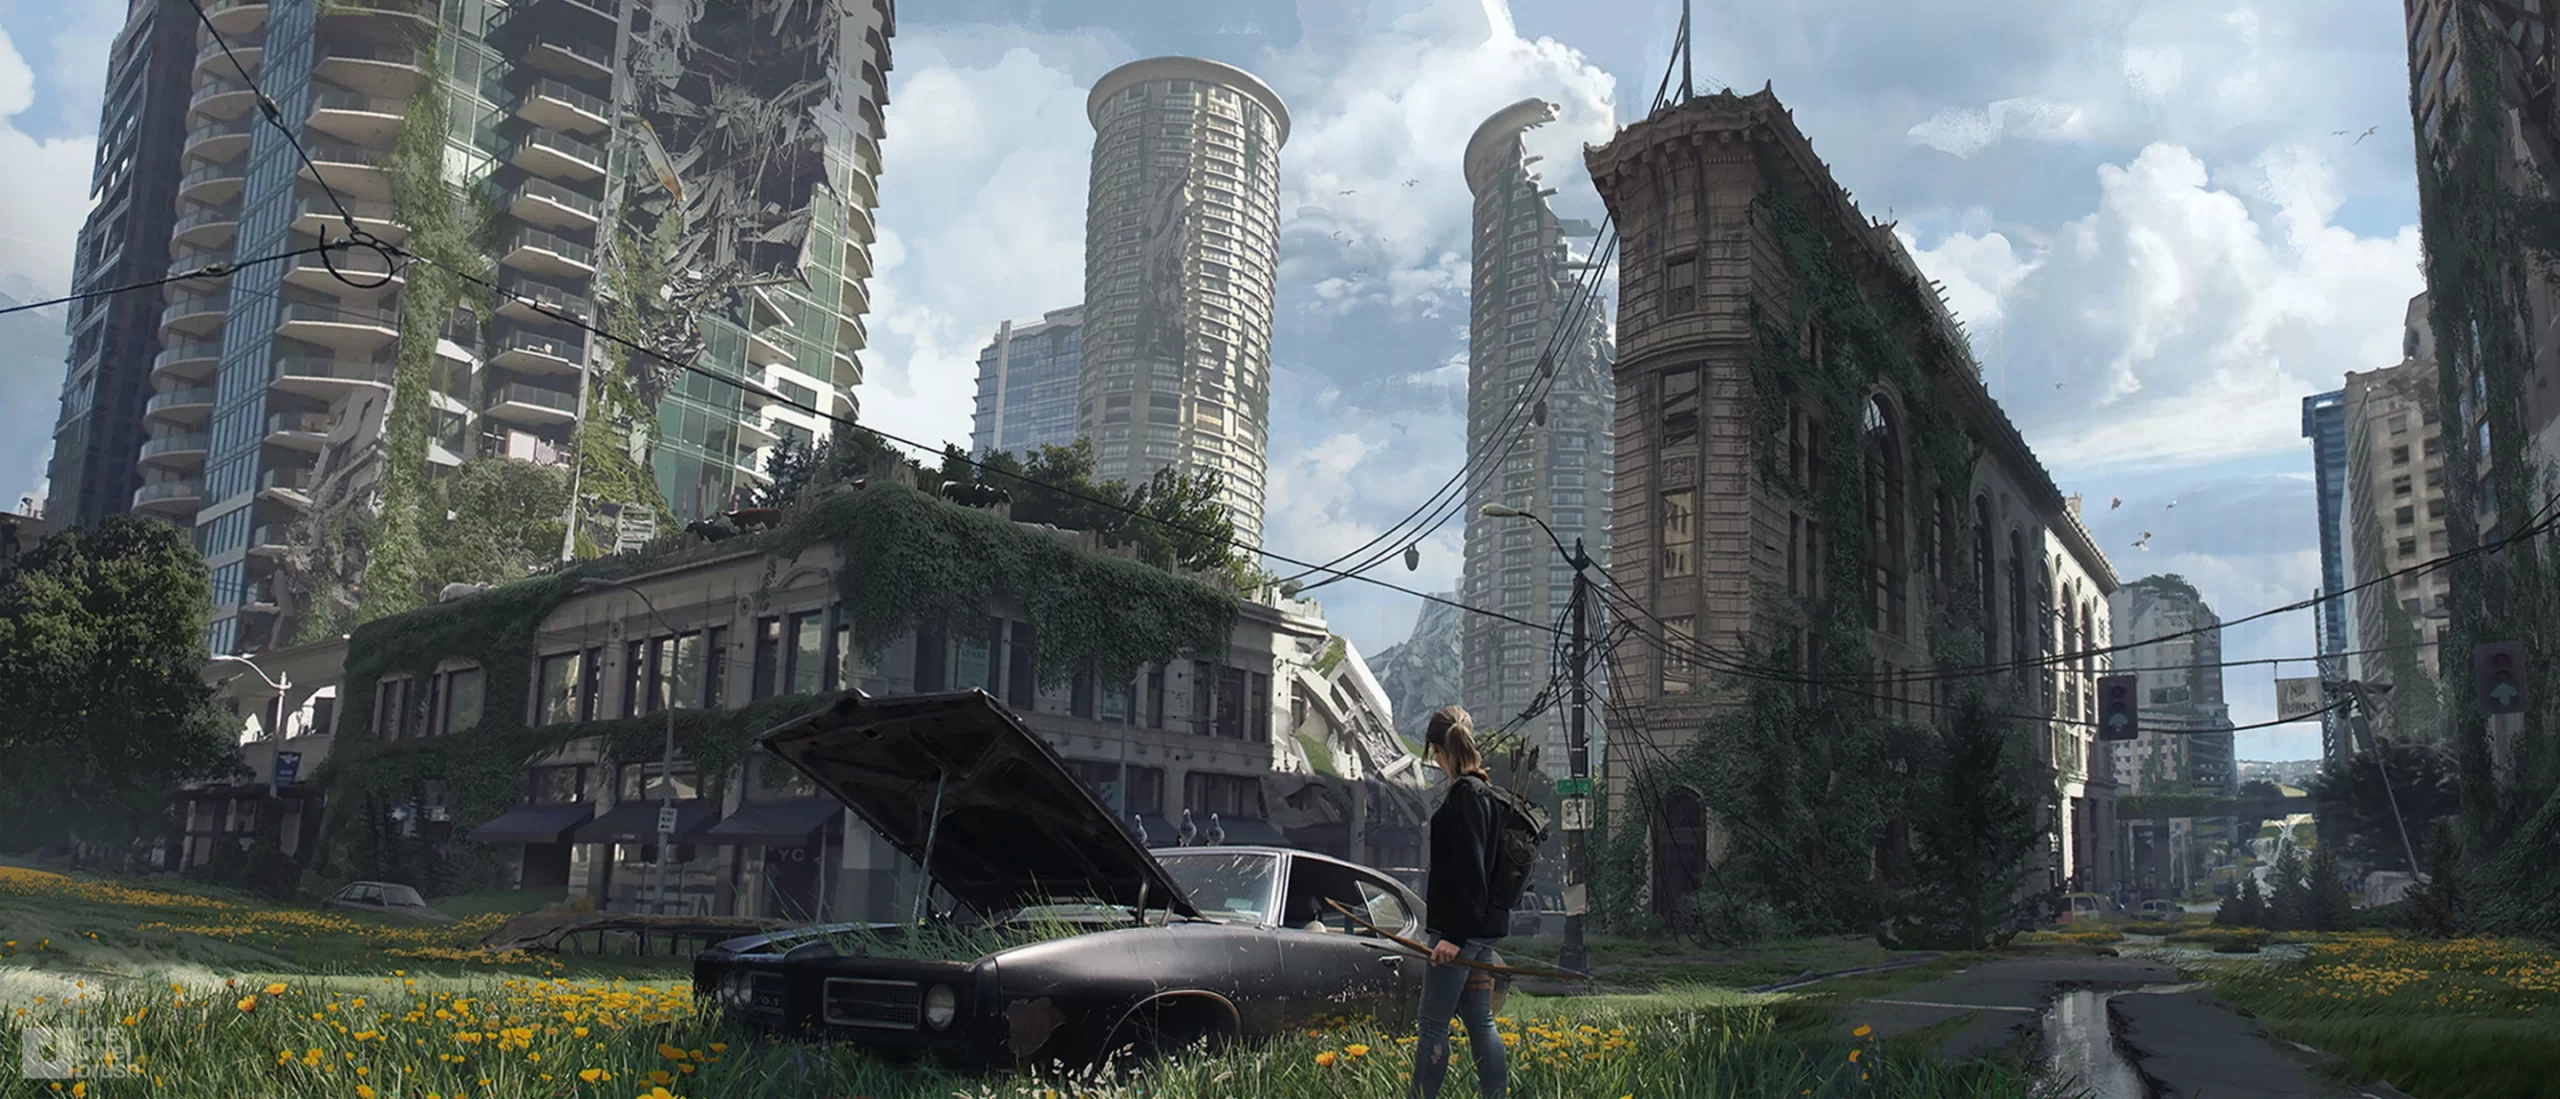 the-last-of-us-2-video-game-concept-art-post-apocalyptistic-broken-car-environment-2880x1236